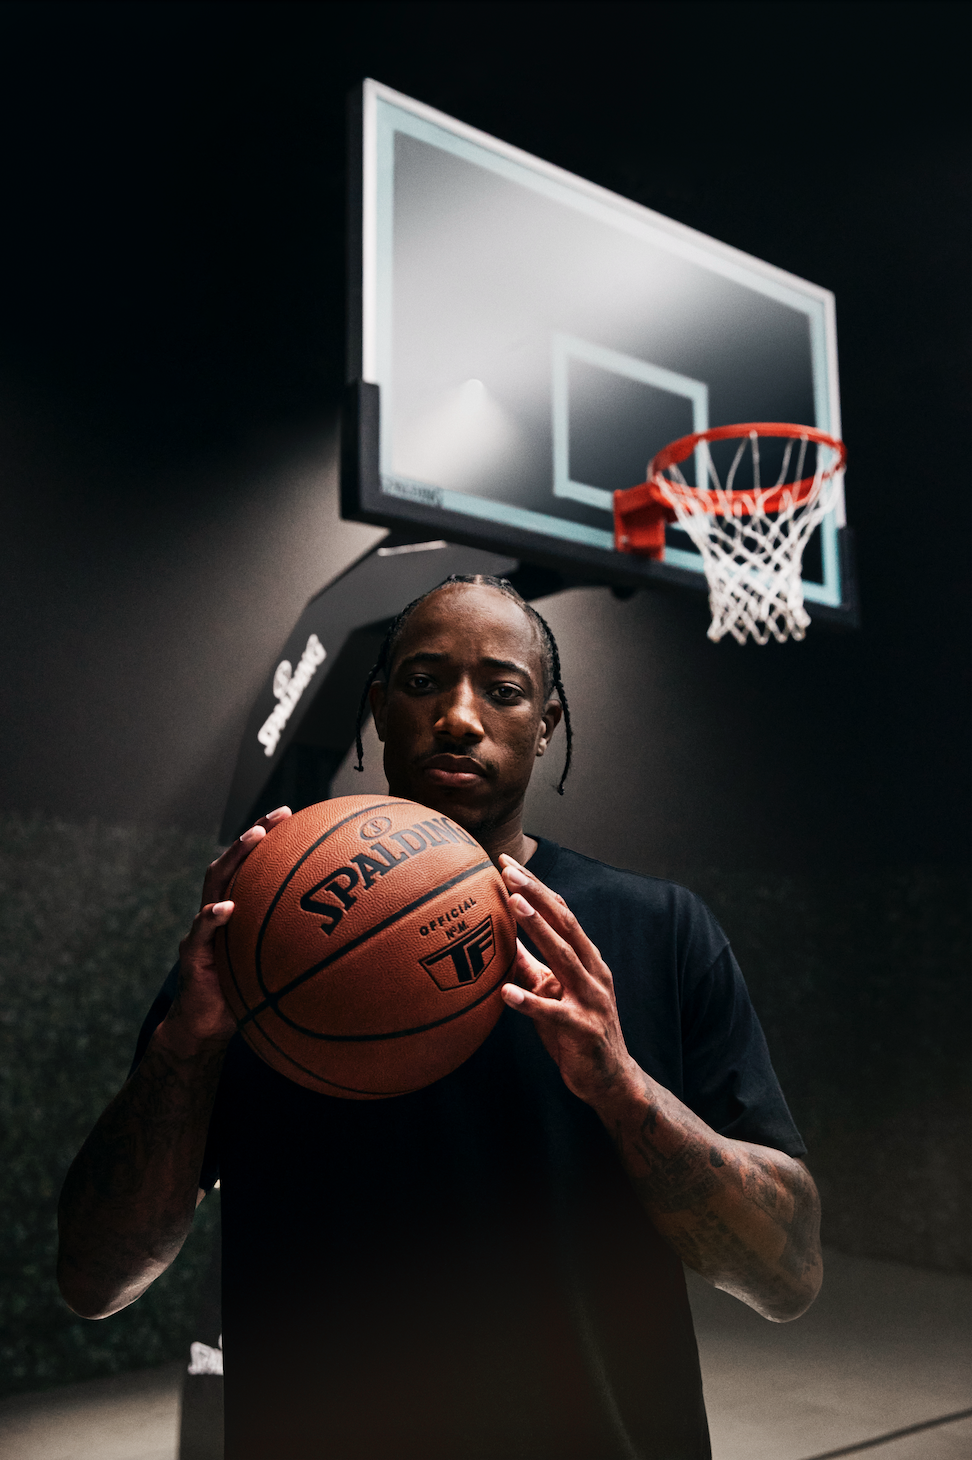 Spalding Is Bringing Hoop Dreams to the Driveway With the New Spalding Arena Renegade®